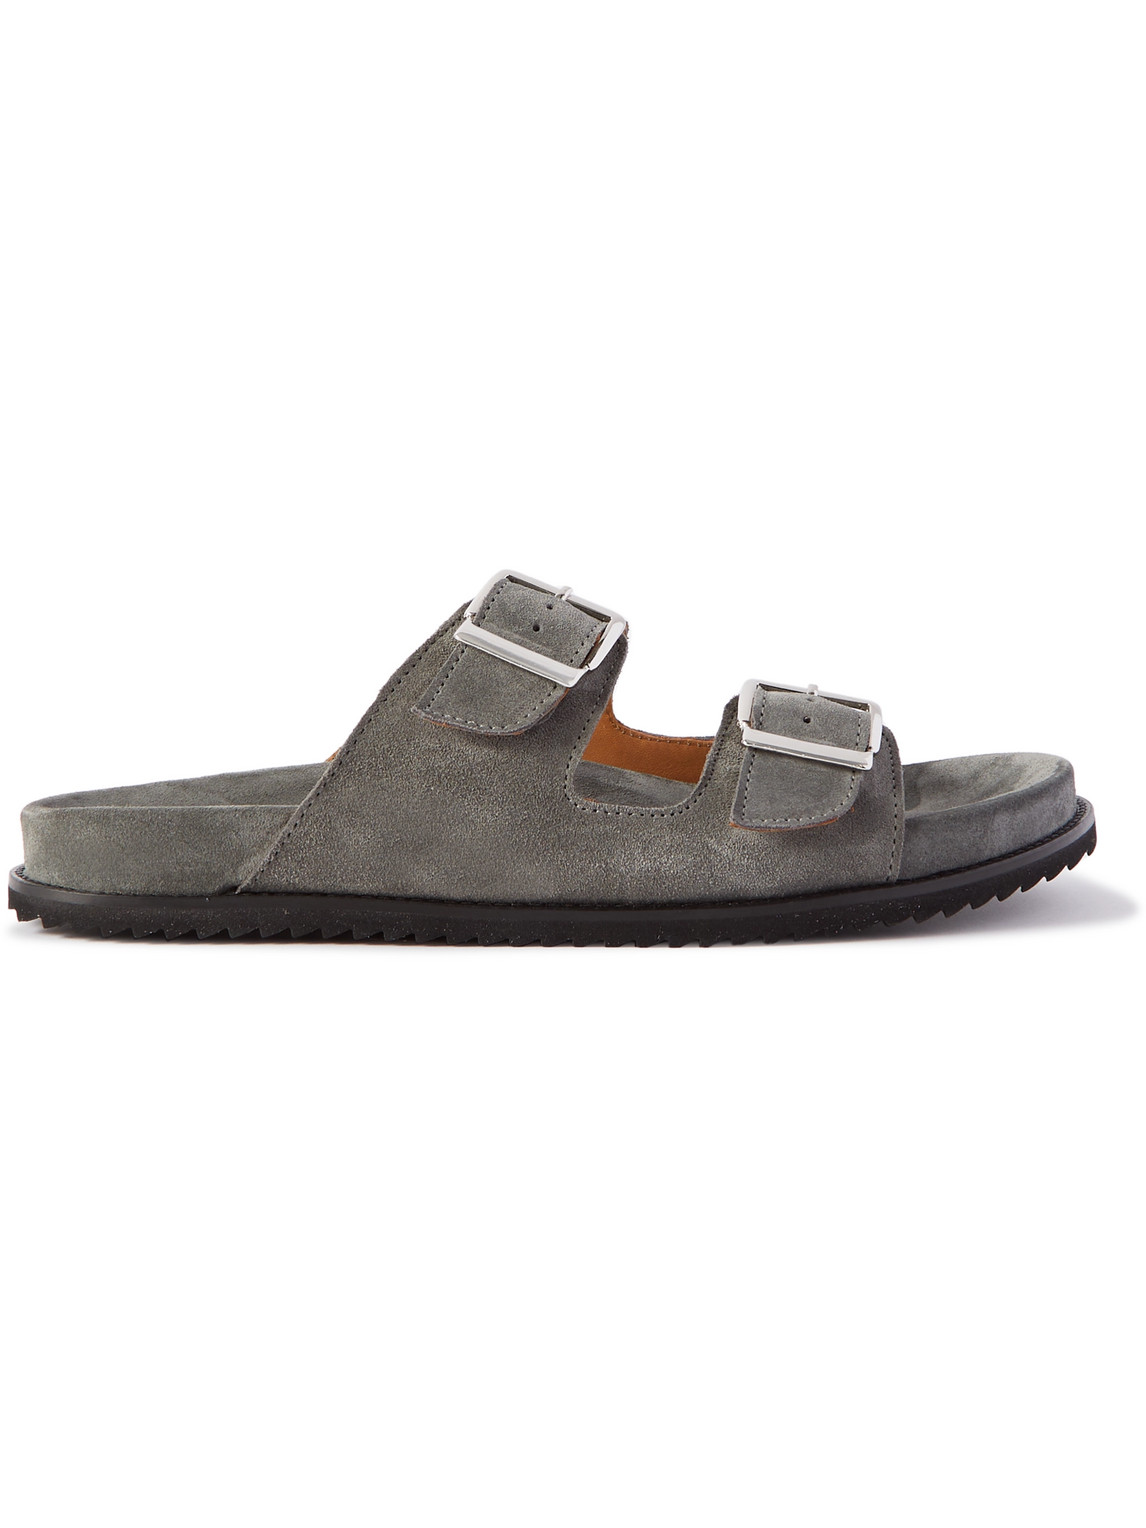 Mr P David Buckled Regenerated Suede By Evolo® Sandals In Grey